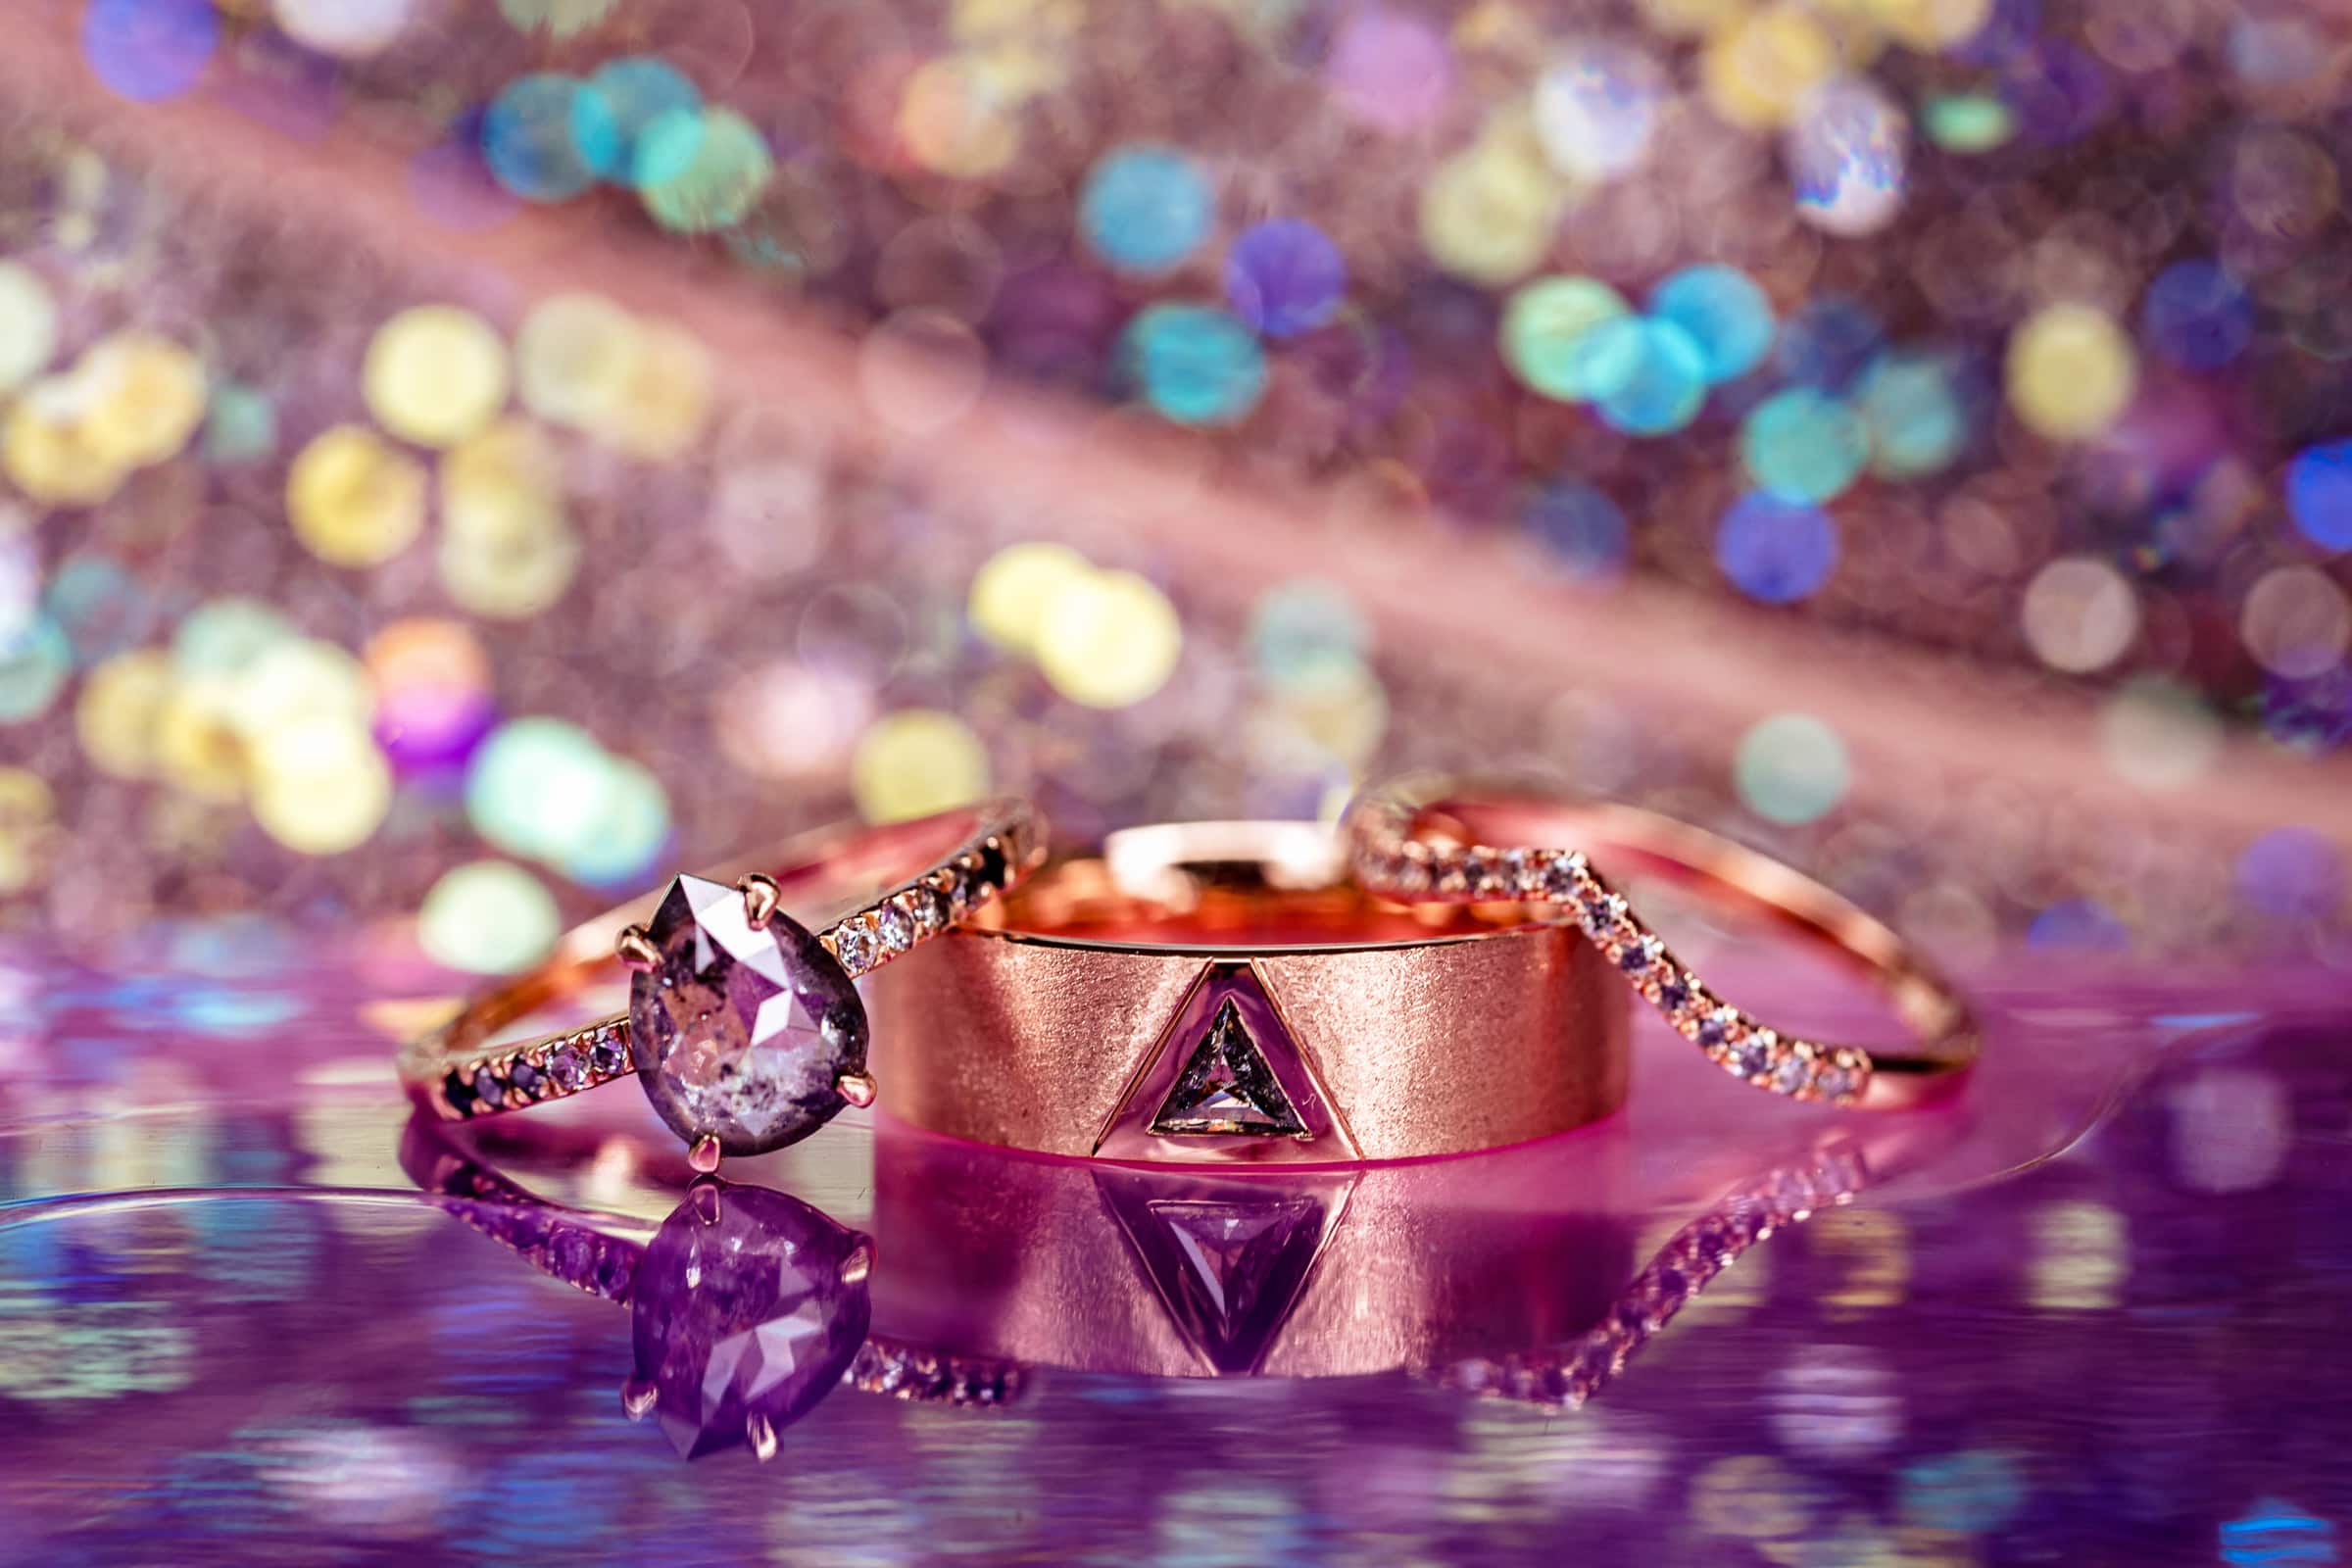 unique, artistic wedding rings on a glossy purple surface with pink and purple glittery background | Kivus & Camera